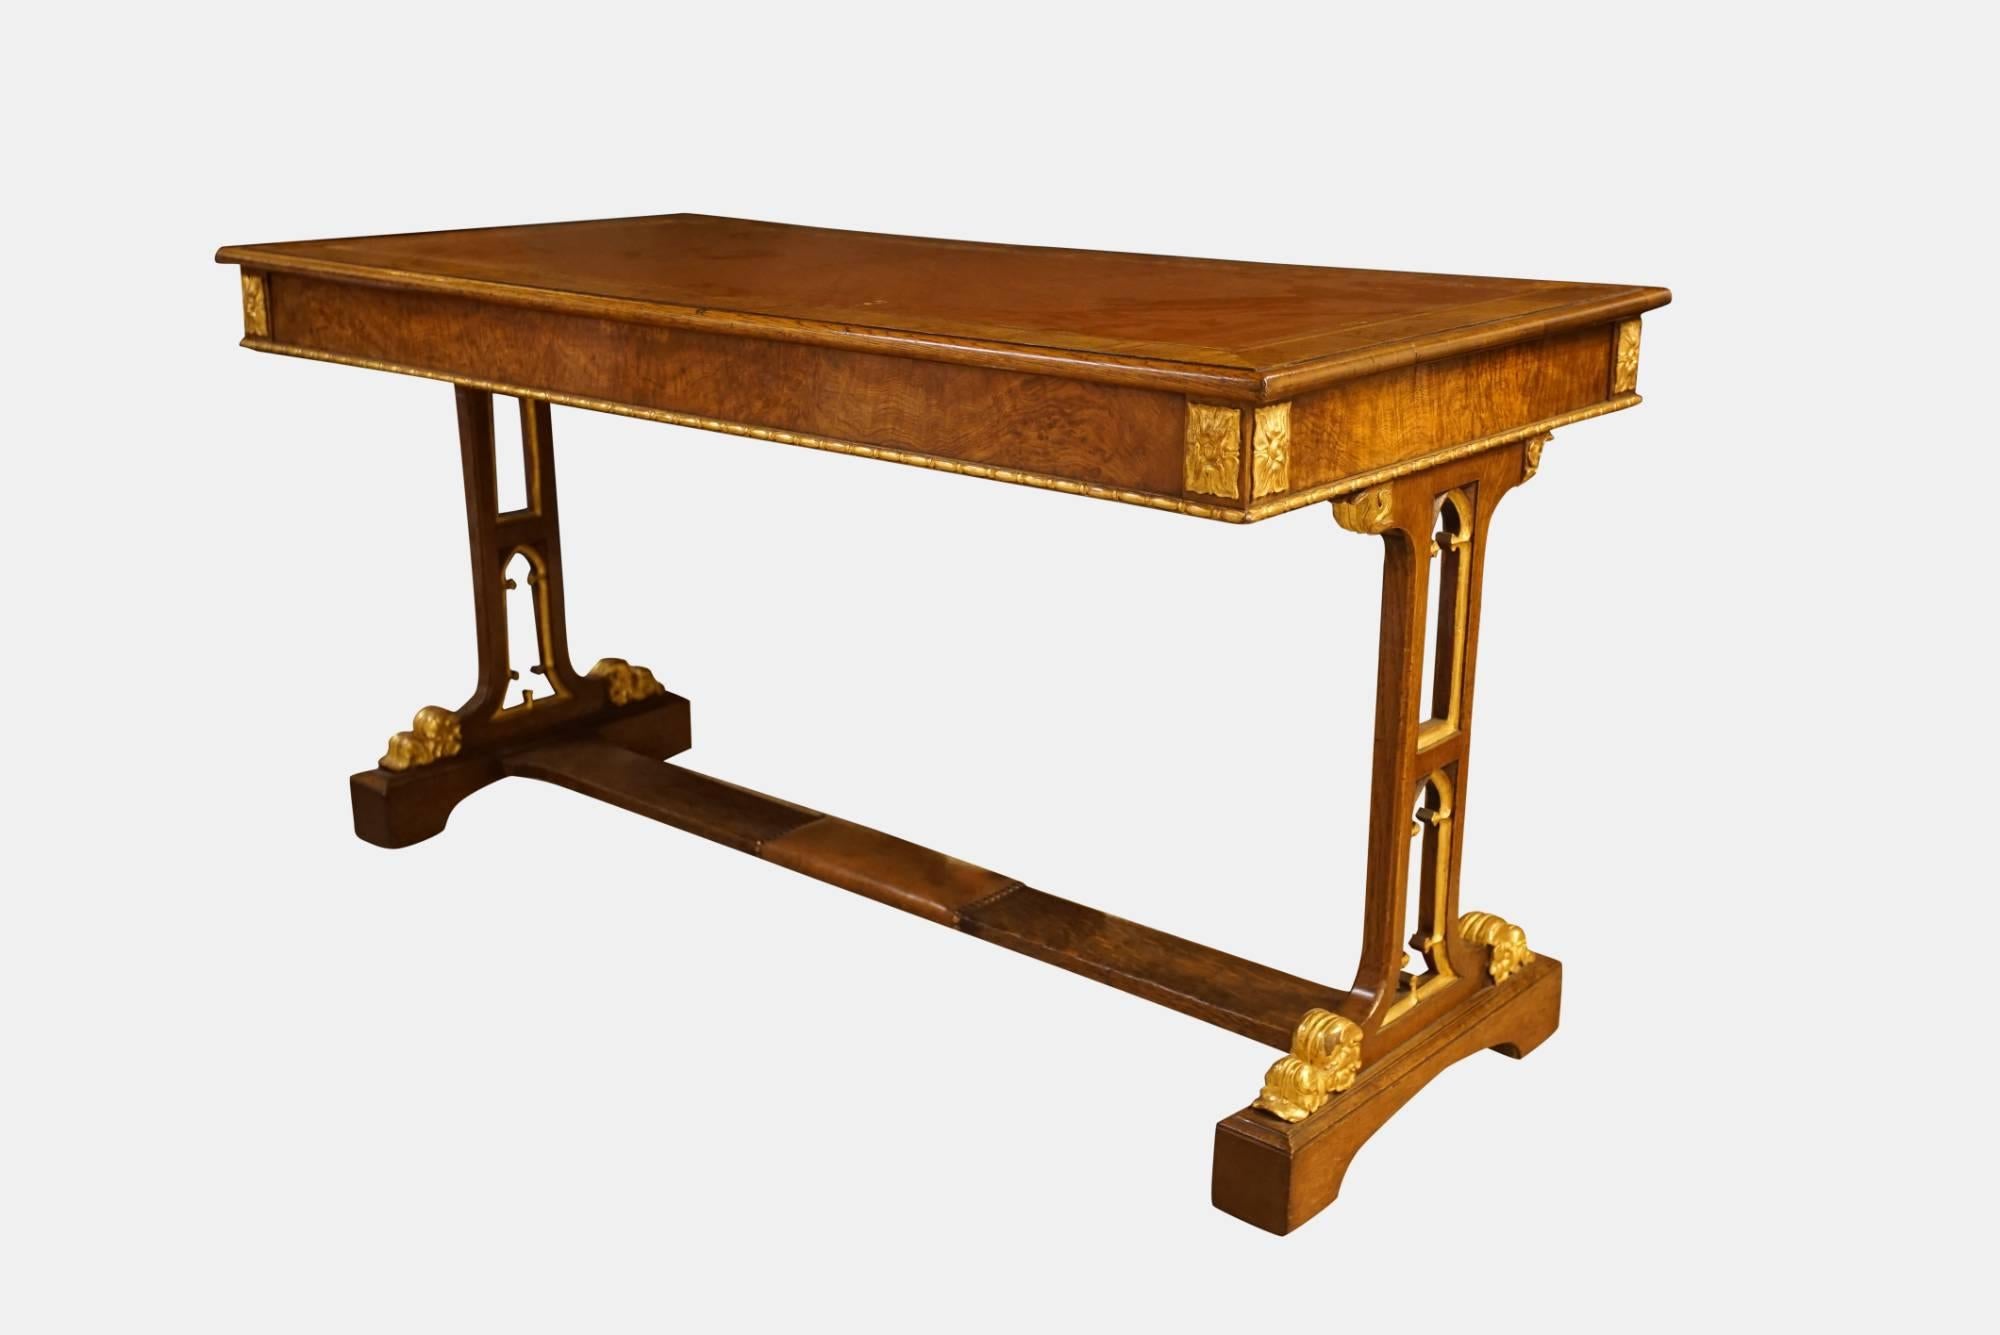 A late Regency oak Gothic library table with gilded enrichments (in the manner of William Porden).